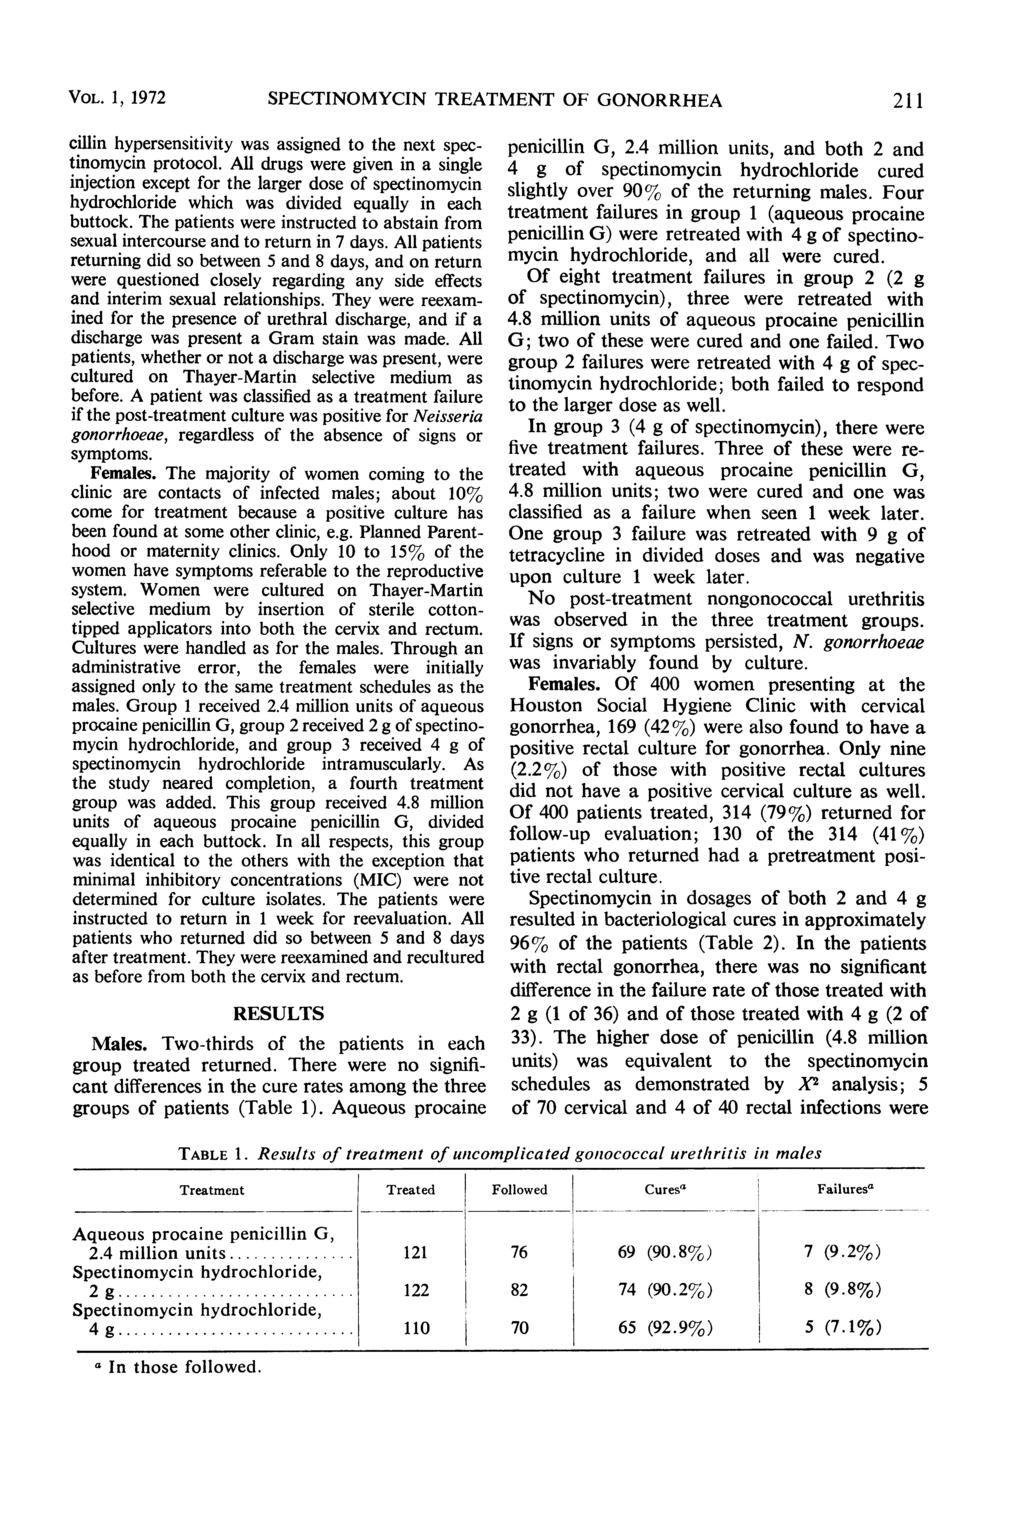 VOL. 1, 1972 SPECTINOMYCIN TREATMENT OF GONORRHEA 211 cillin hypersensitivity was assigned to the next spectinomycin protocol.